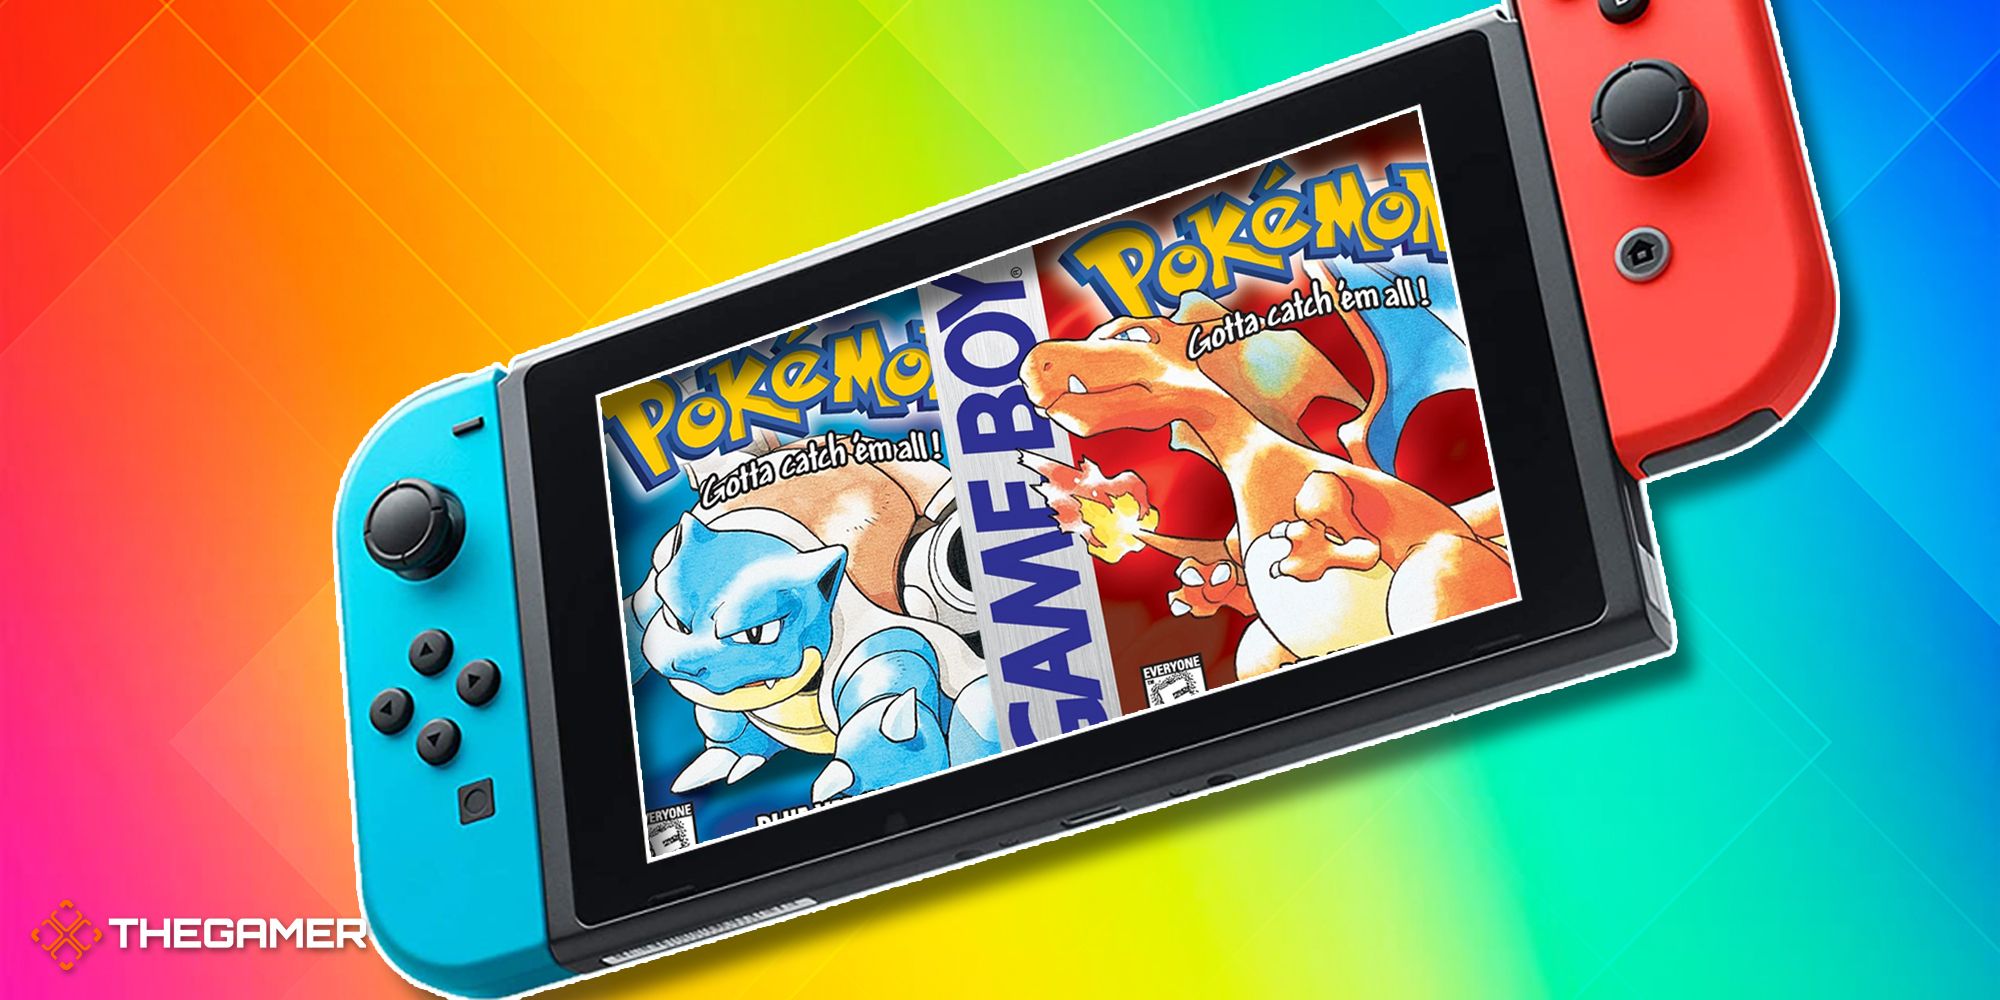 They are not gonna bring old pokemon games to nintendo online